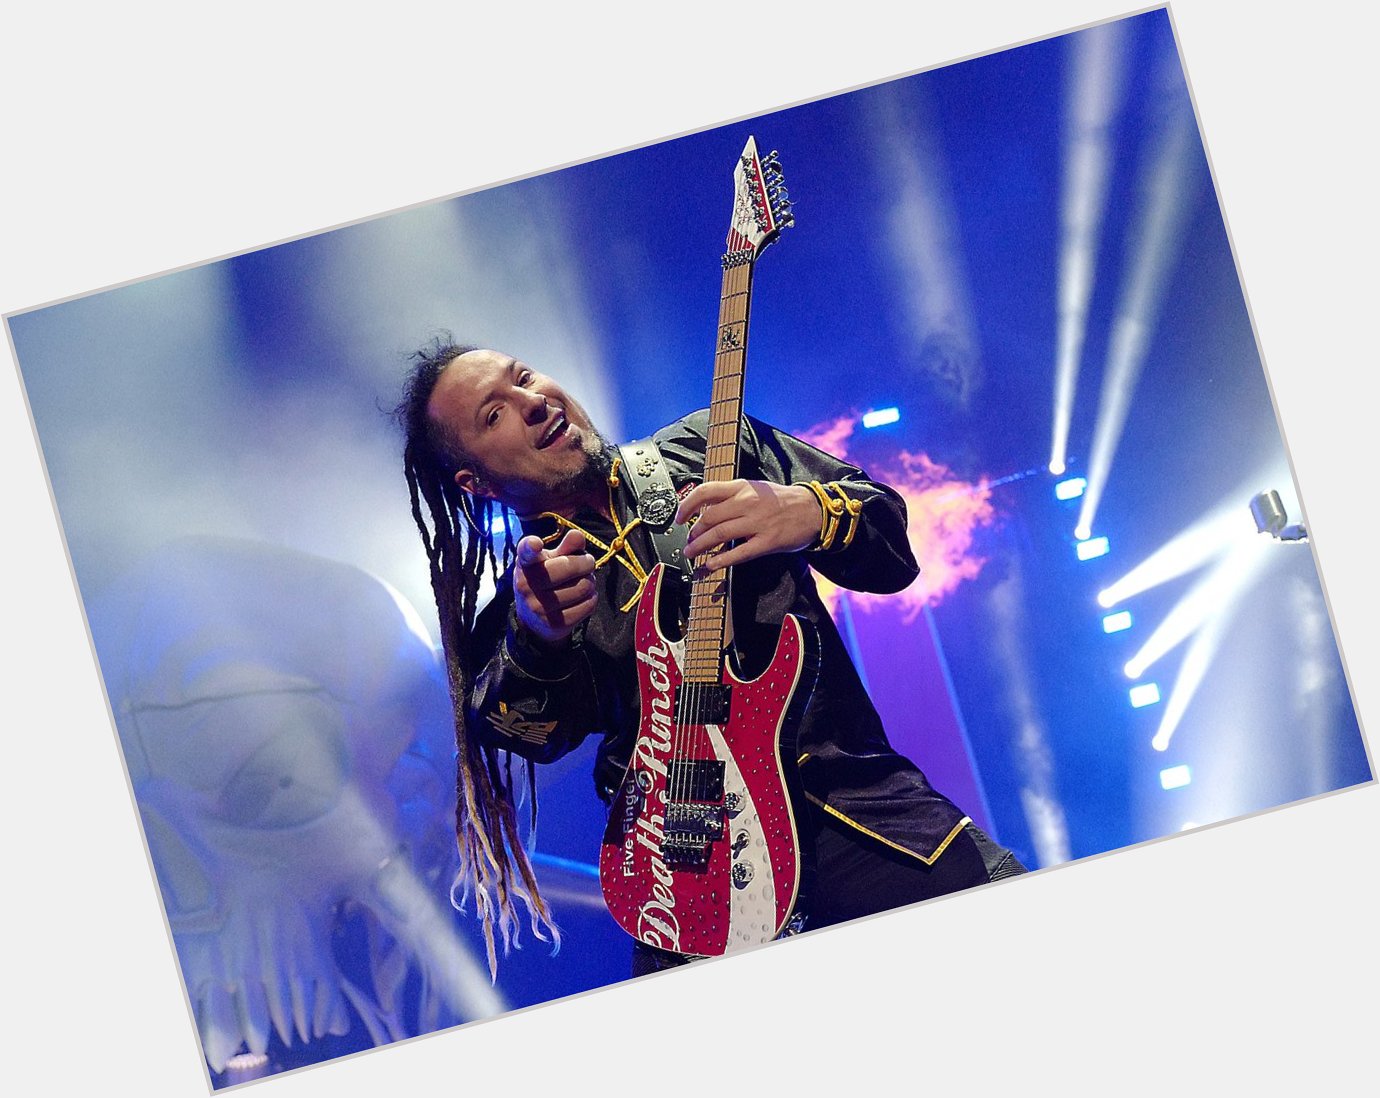 Happy Birthday to Zoltan Bathory. Born in Szentendre, Hungary on this day in 1978.    